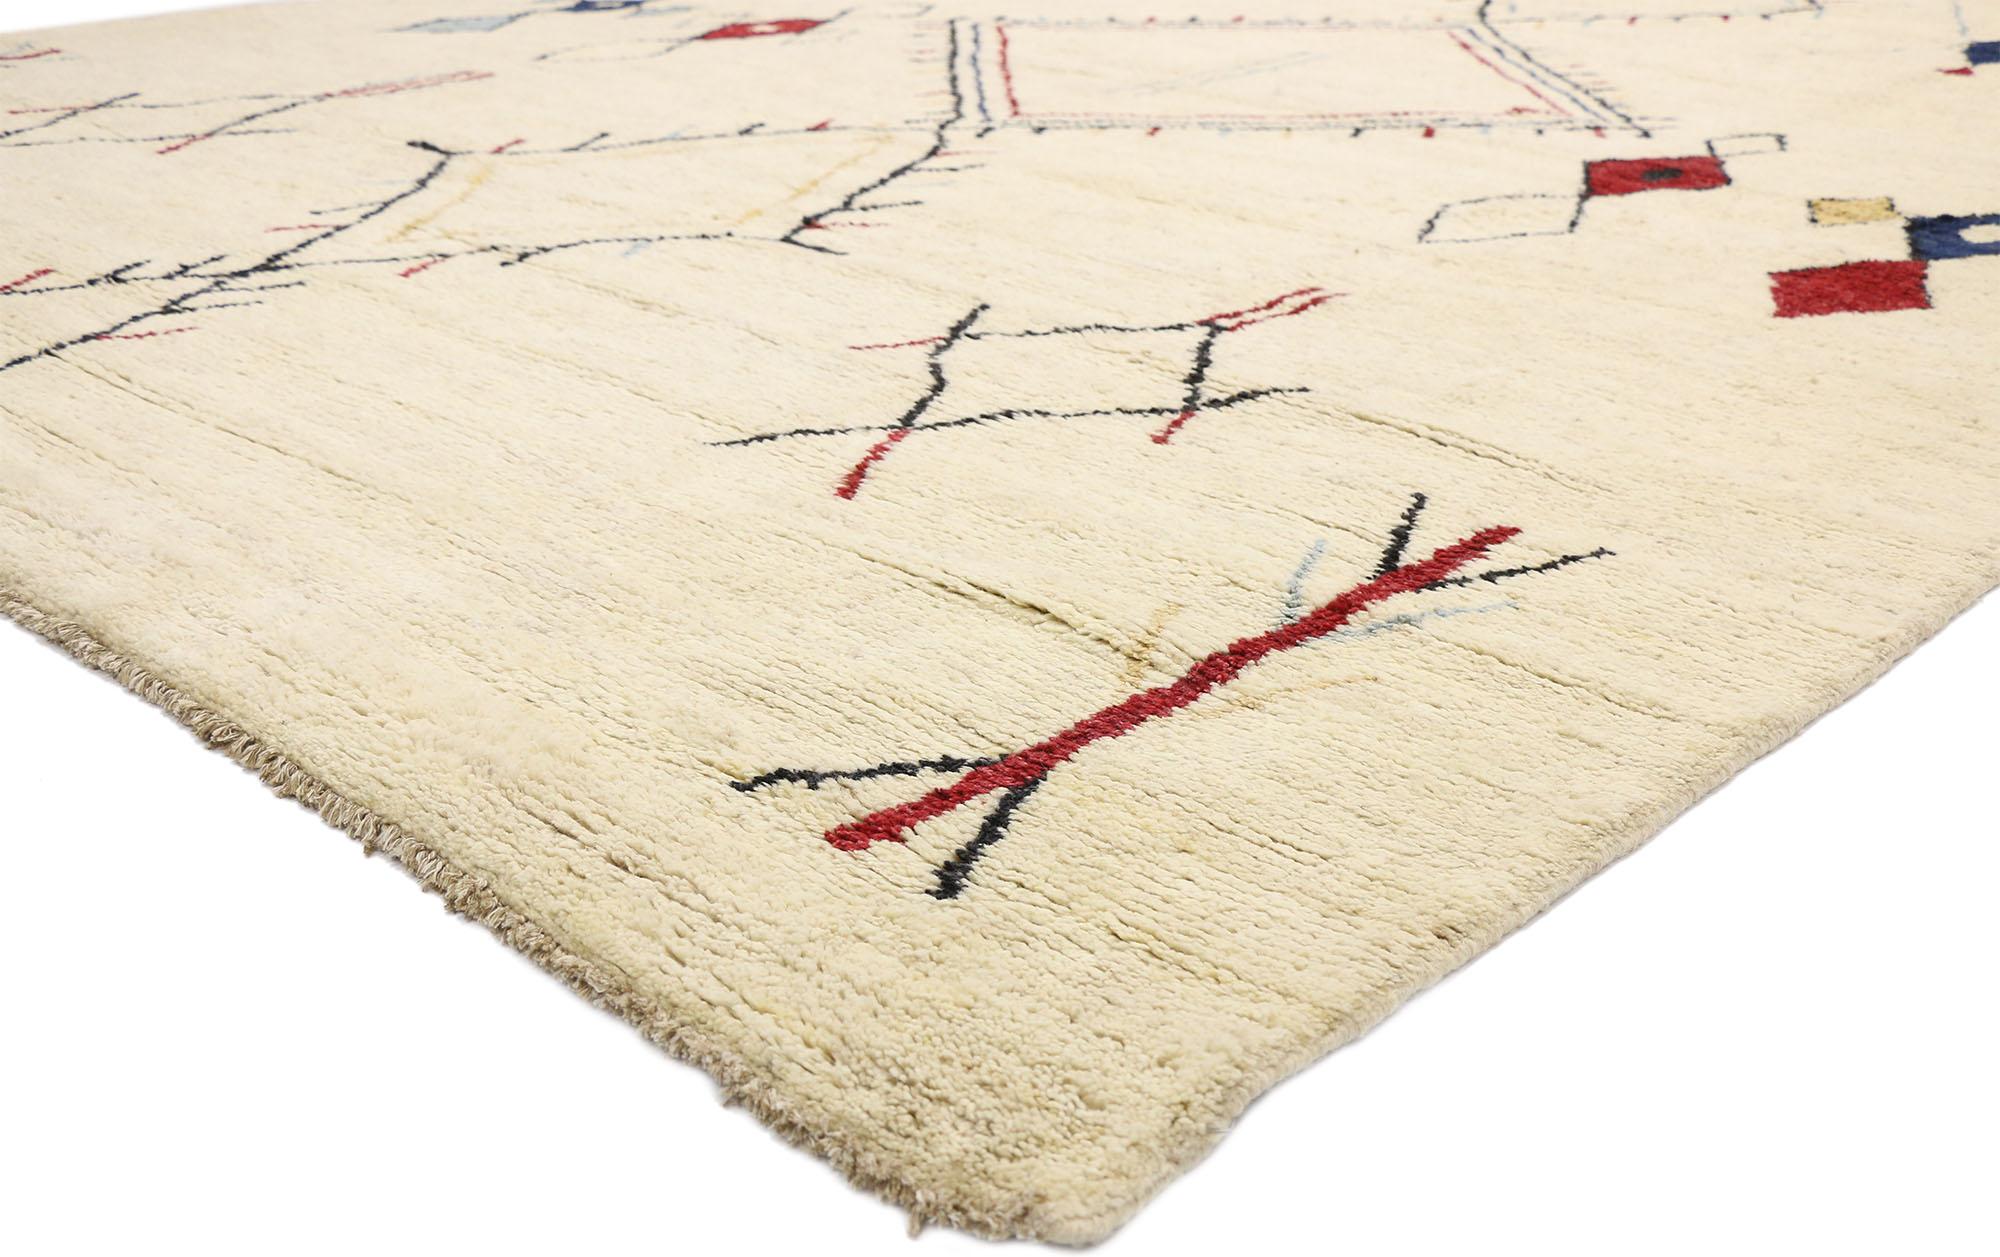 80474, contemporary Moroccan style area rug with modern tribal design. This is a beautiful example of a contemporary Moroccan style area rug with Modern tribal design, woven with a clean and simple, yet sophisticated composition. It features a